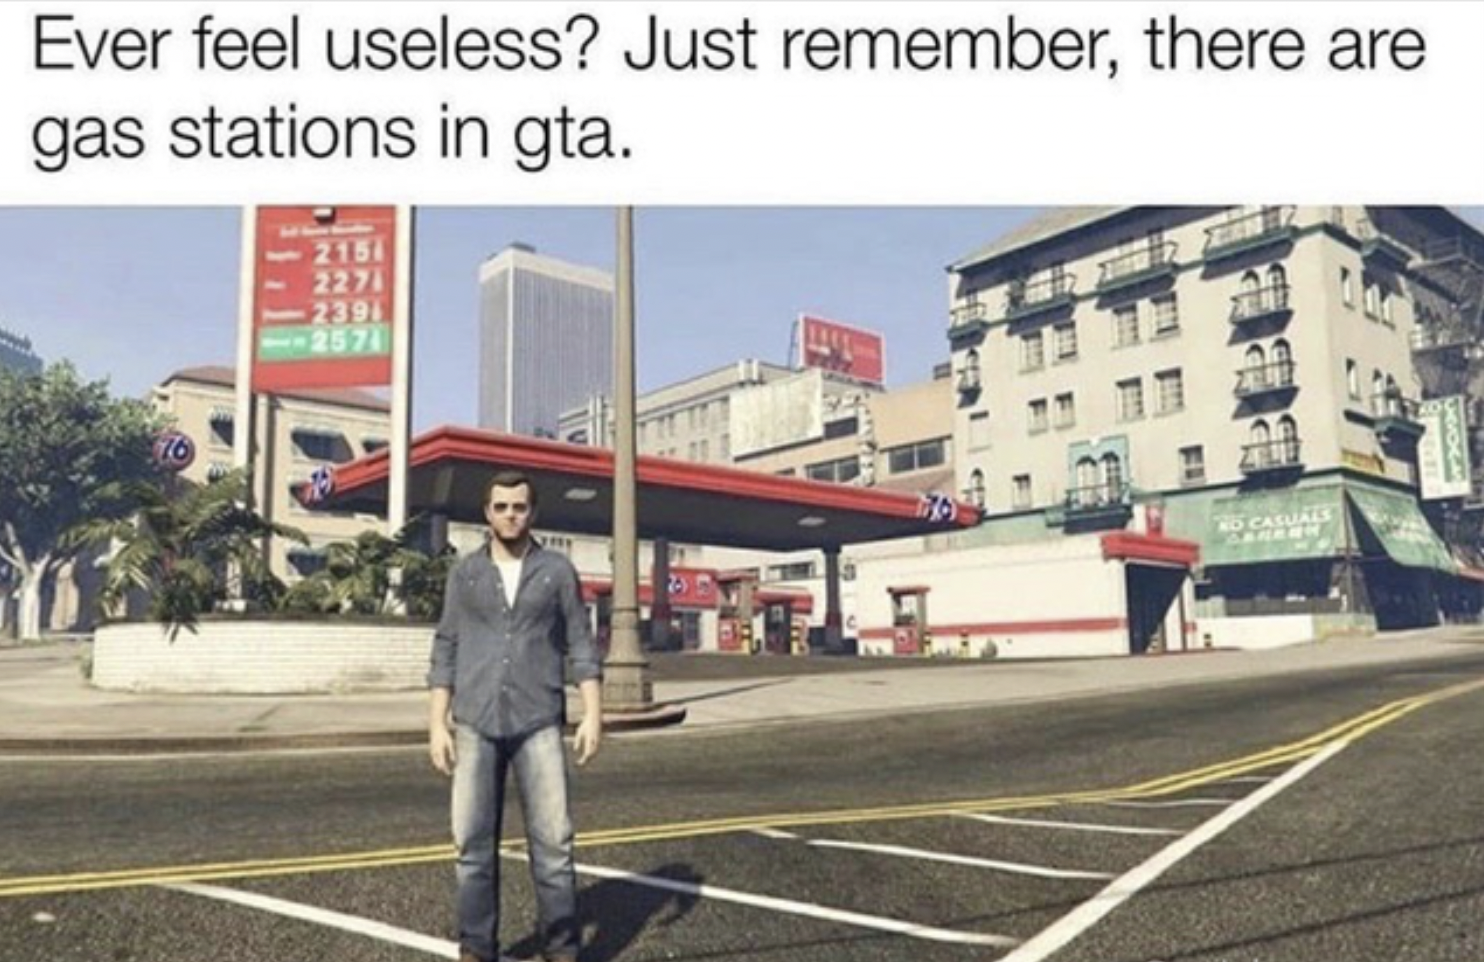 Gaming memes - if you ever feel useless remember gta - Ever feel useless? Just remember, there are gas stations in gta.